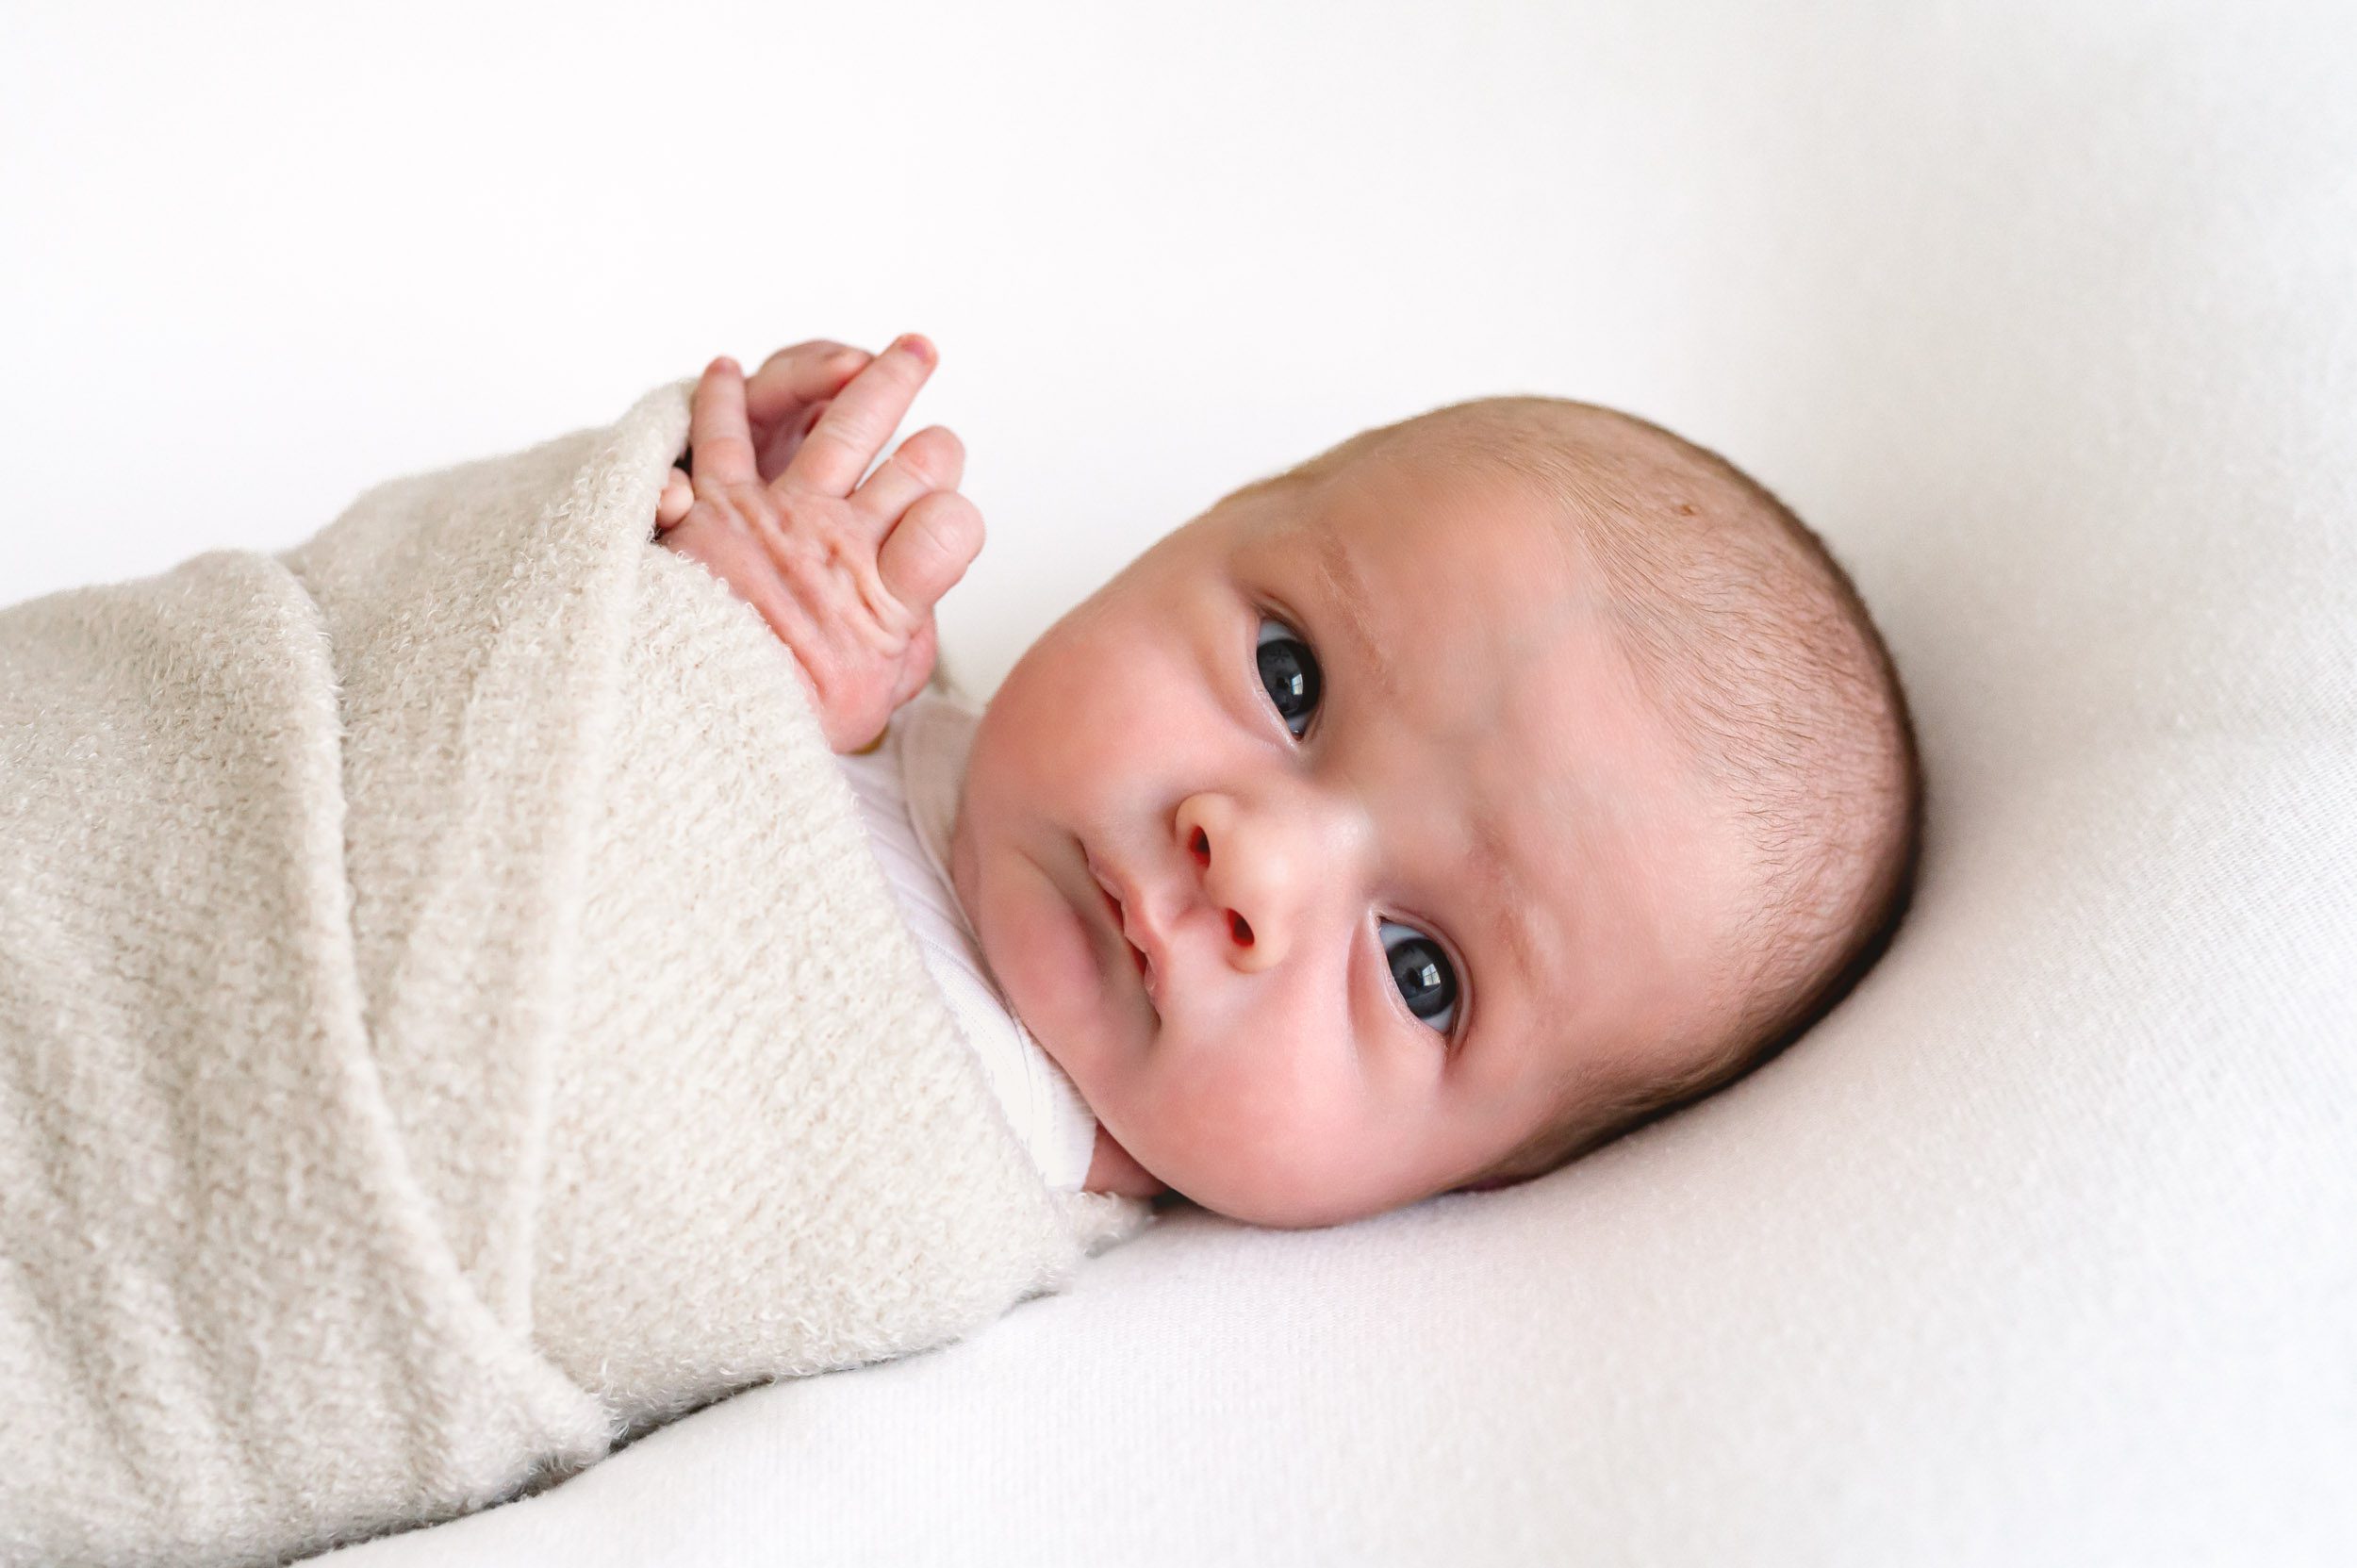 newborn baby boy in a white romper and swaddle looking directly at the camera during a newborn baby photography session